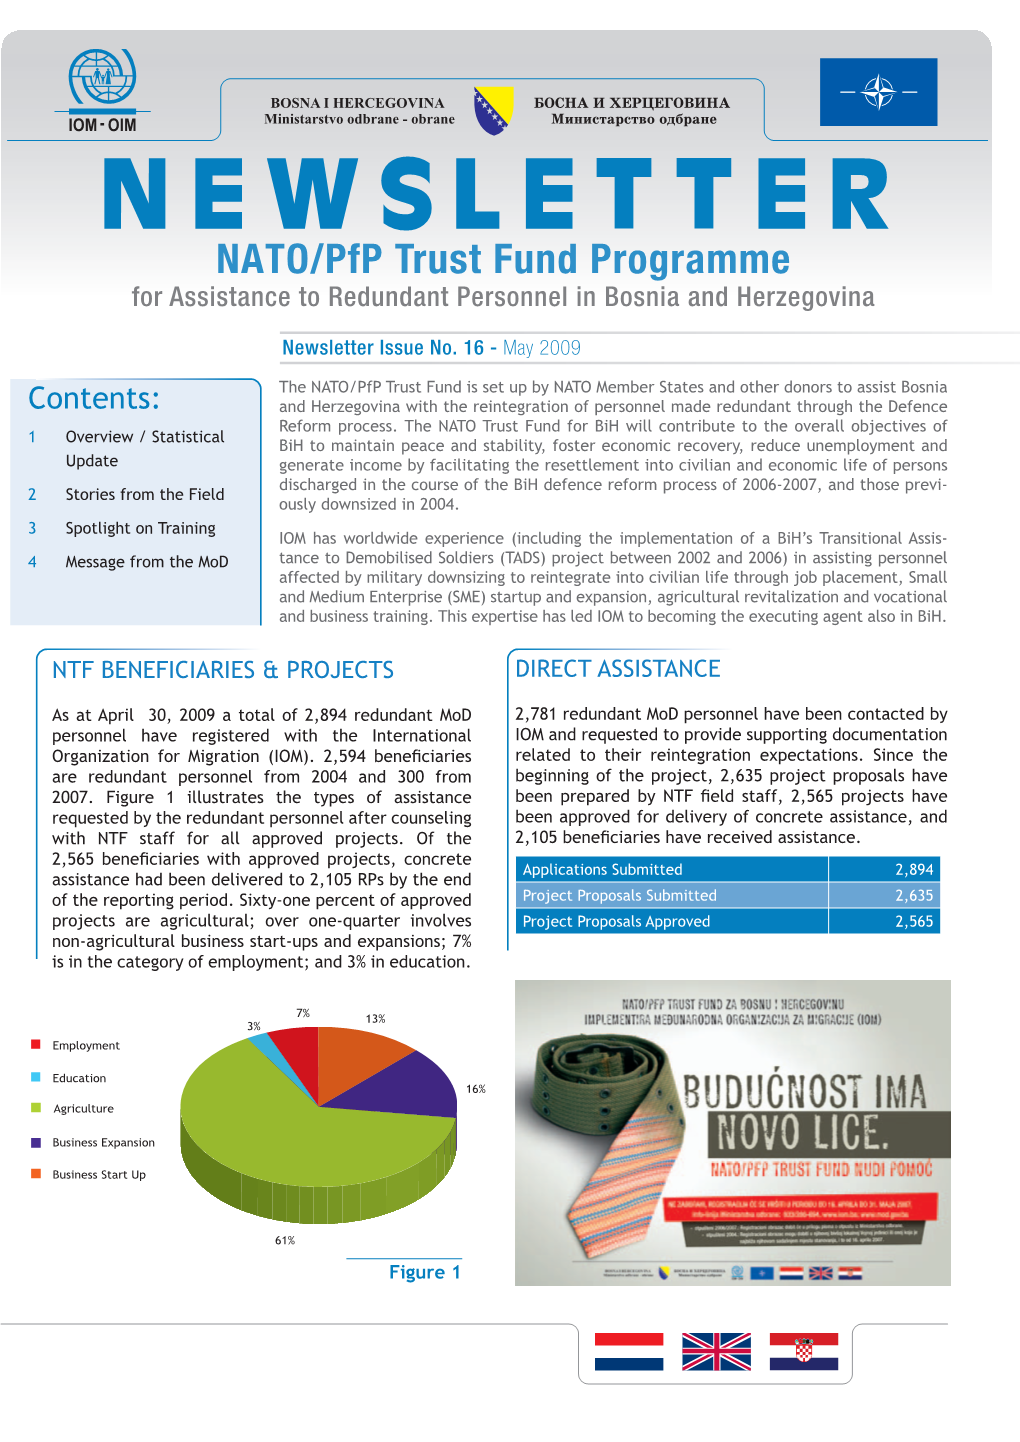 NEWSLETTER NATO/Pfp Trust Fund Programme for Assistance to Redundant Personnel in Bosnia and Herzegovina